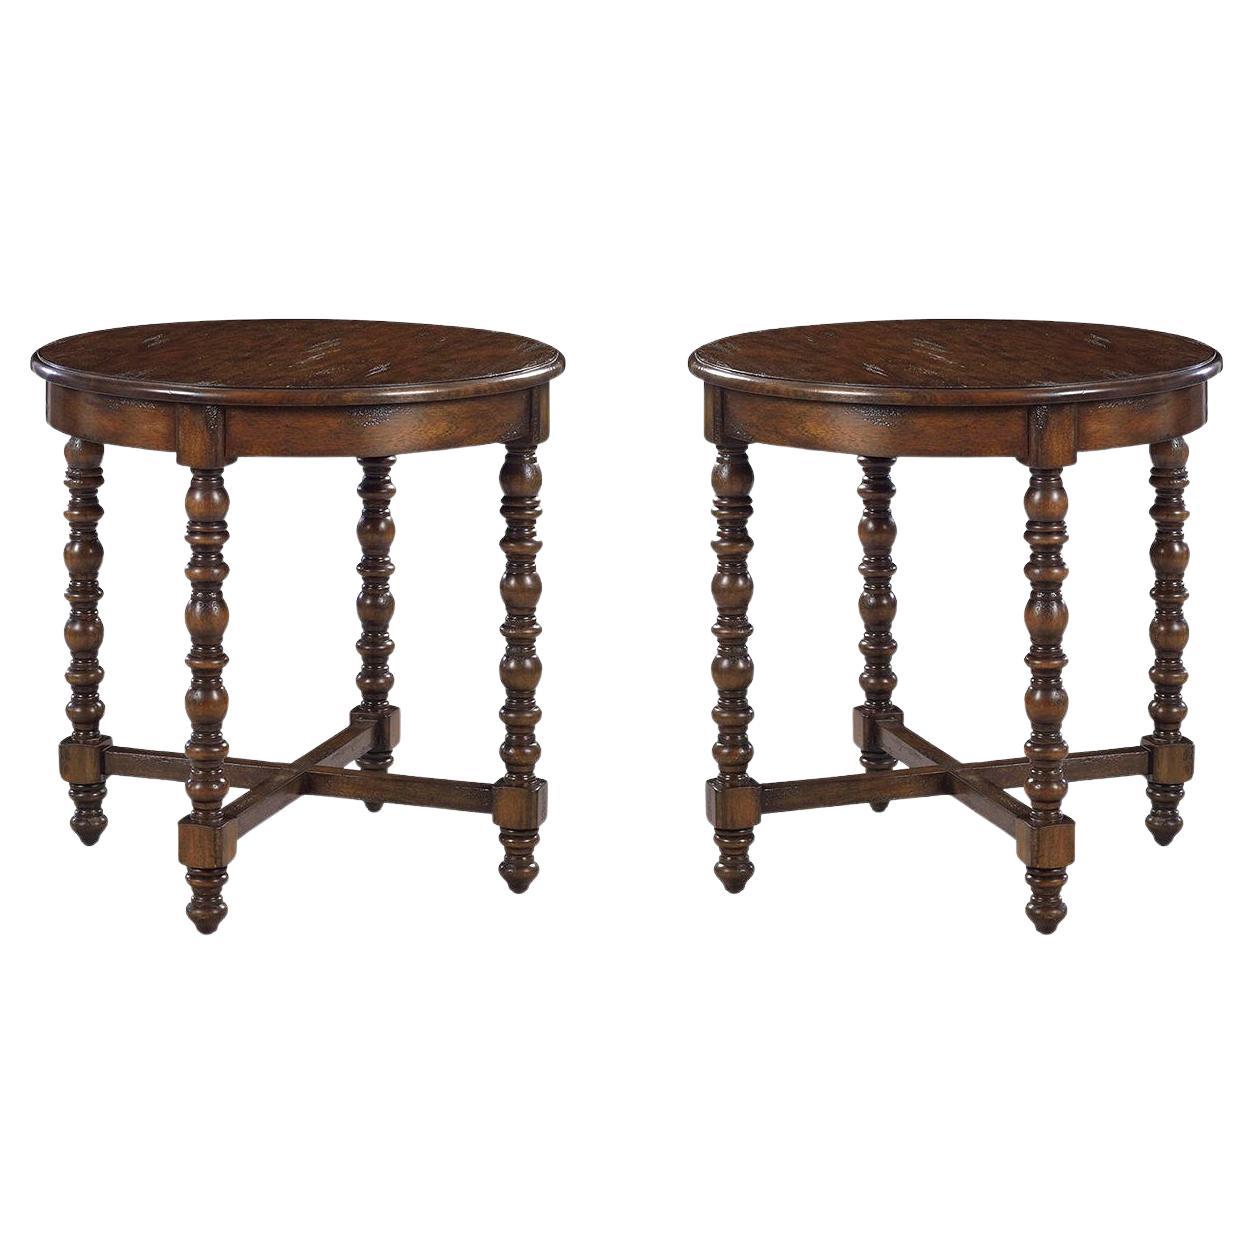 Pair of Jacobean Round Side Tables